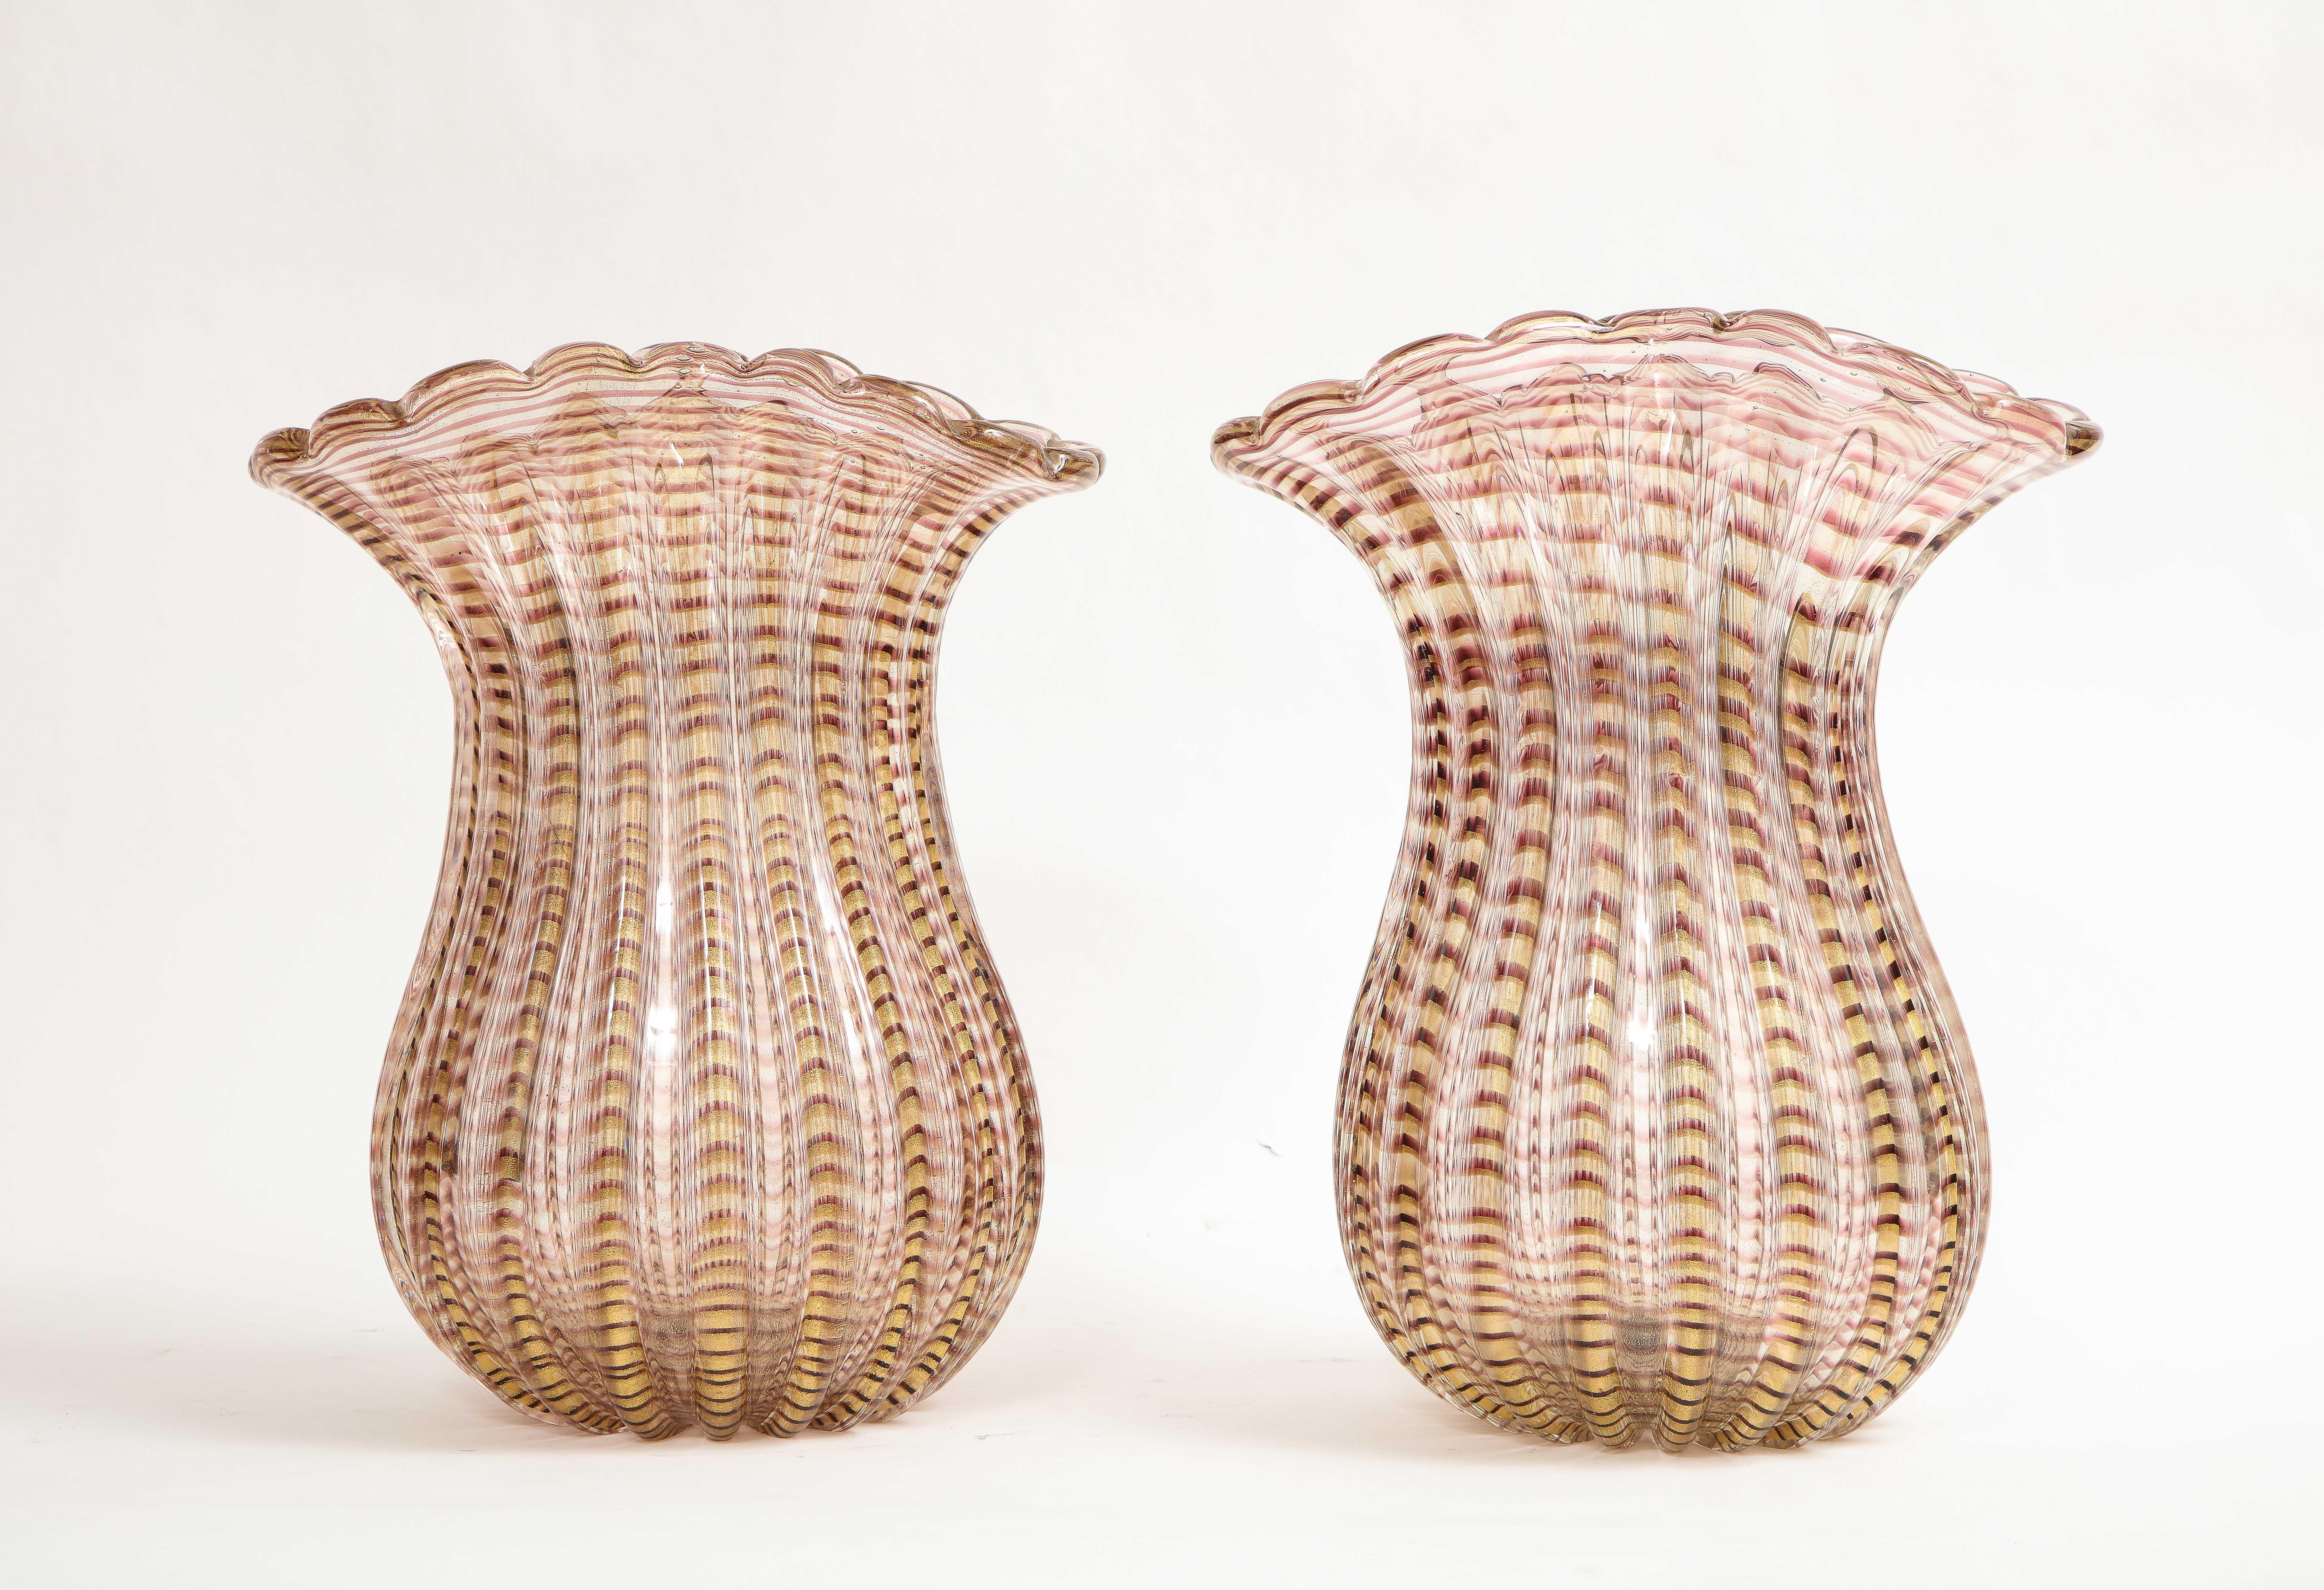 A Pair of Large Mid-Century Modern Italian Murano Glass Striated Blown, Yellow, and Clear Vases.  Each is beautifully blow, and hand-cut into these marvelous vases which are superb in color, quality, and craftsmanship. Each one is ribbed and